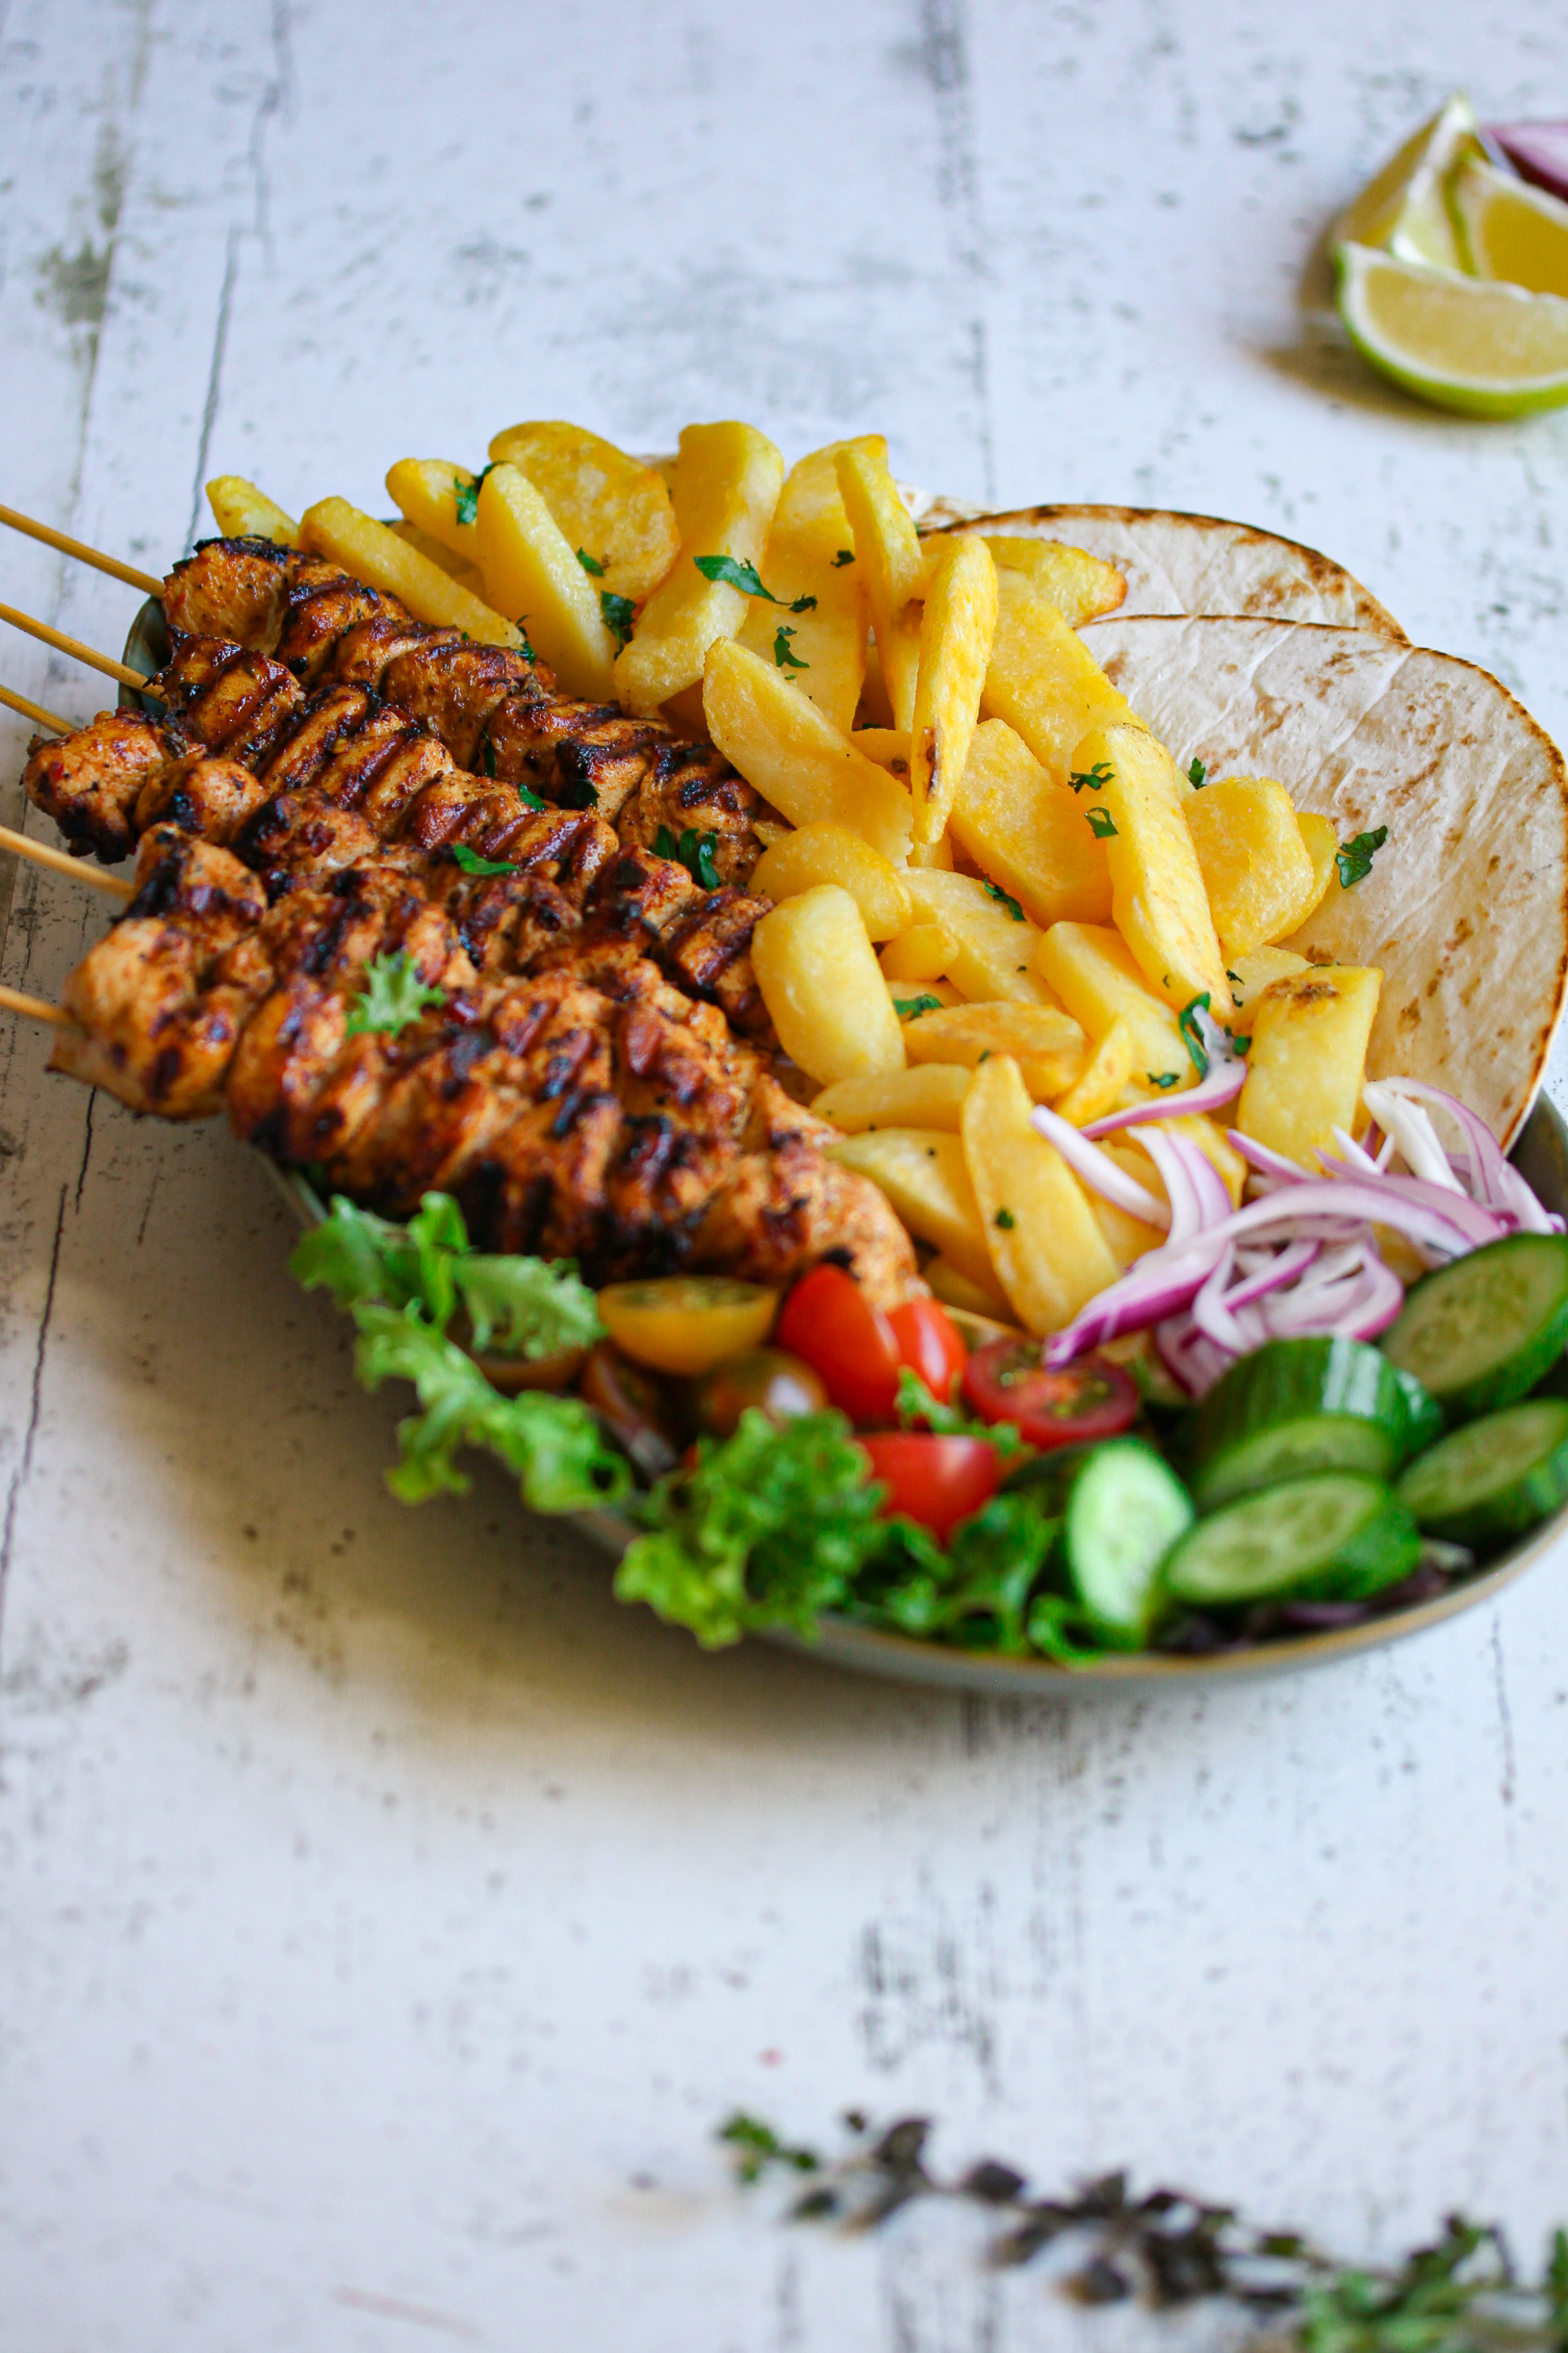 Greek Chicken Souvlaki Skewers with Oven Chips and Crunchy Salad